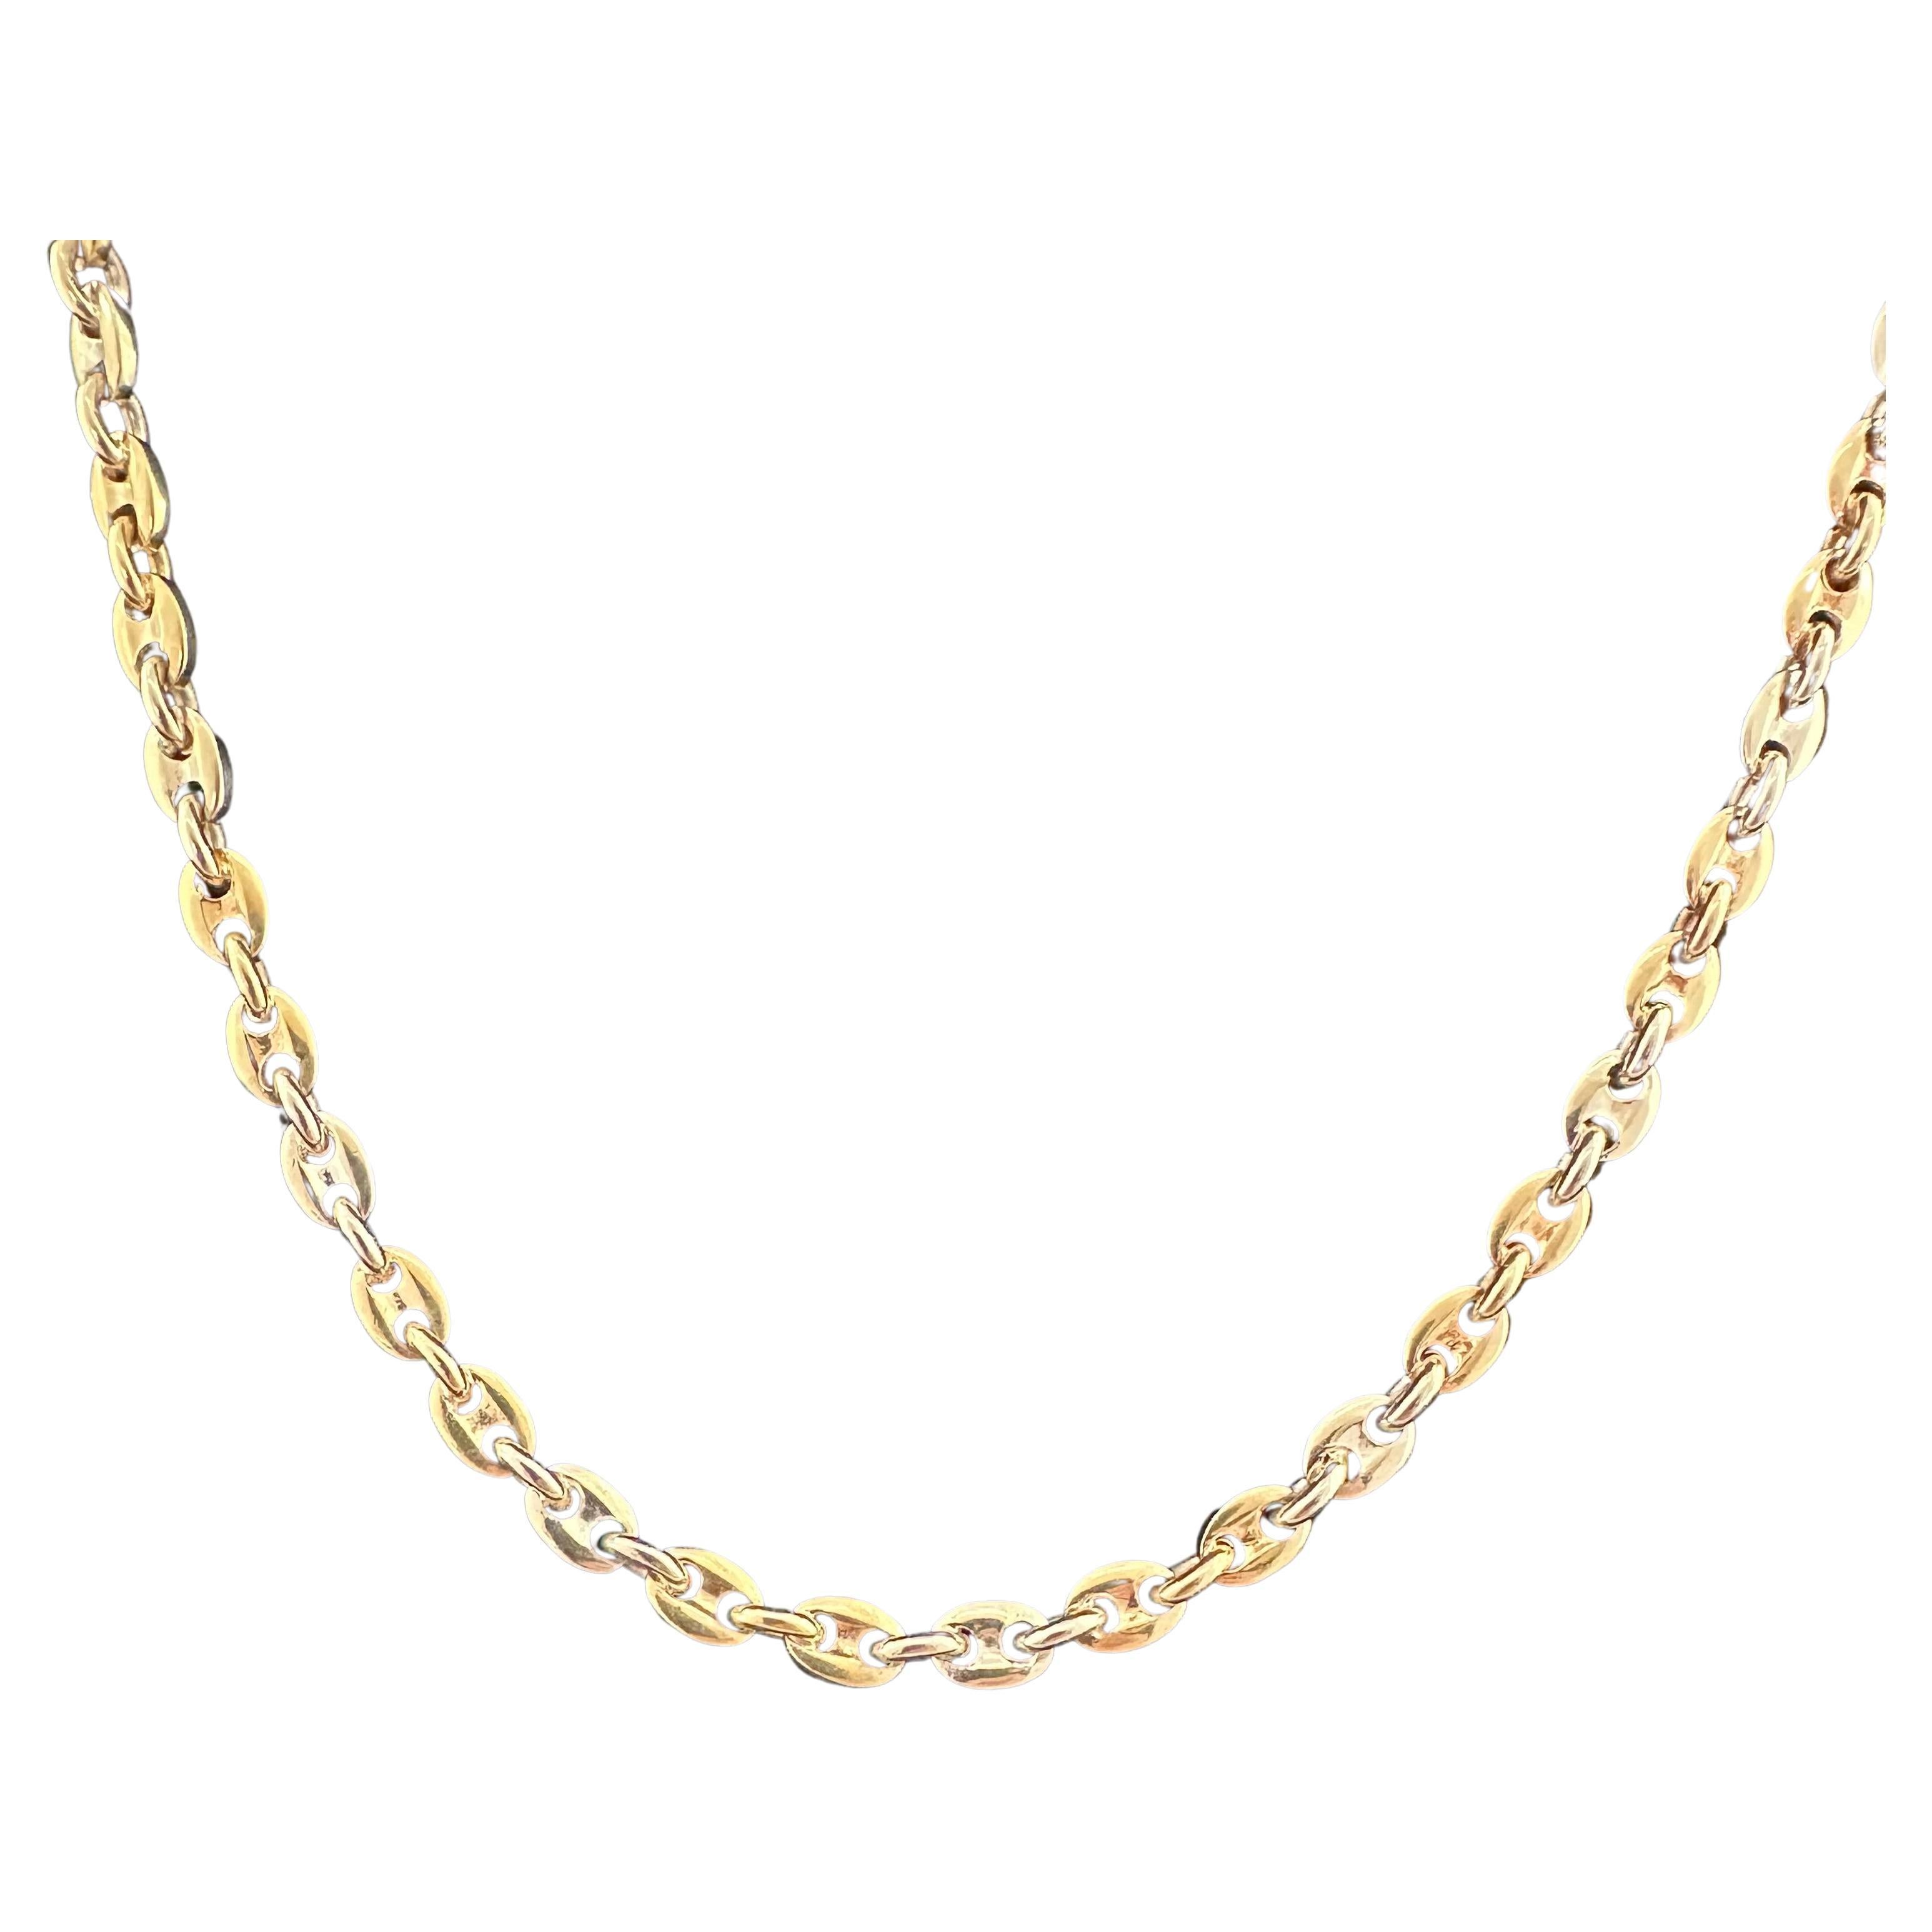 Cartier Marine Link Chain 18k Gold For Sale